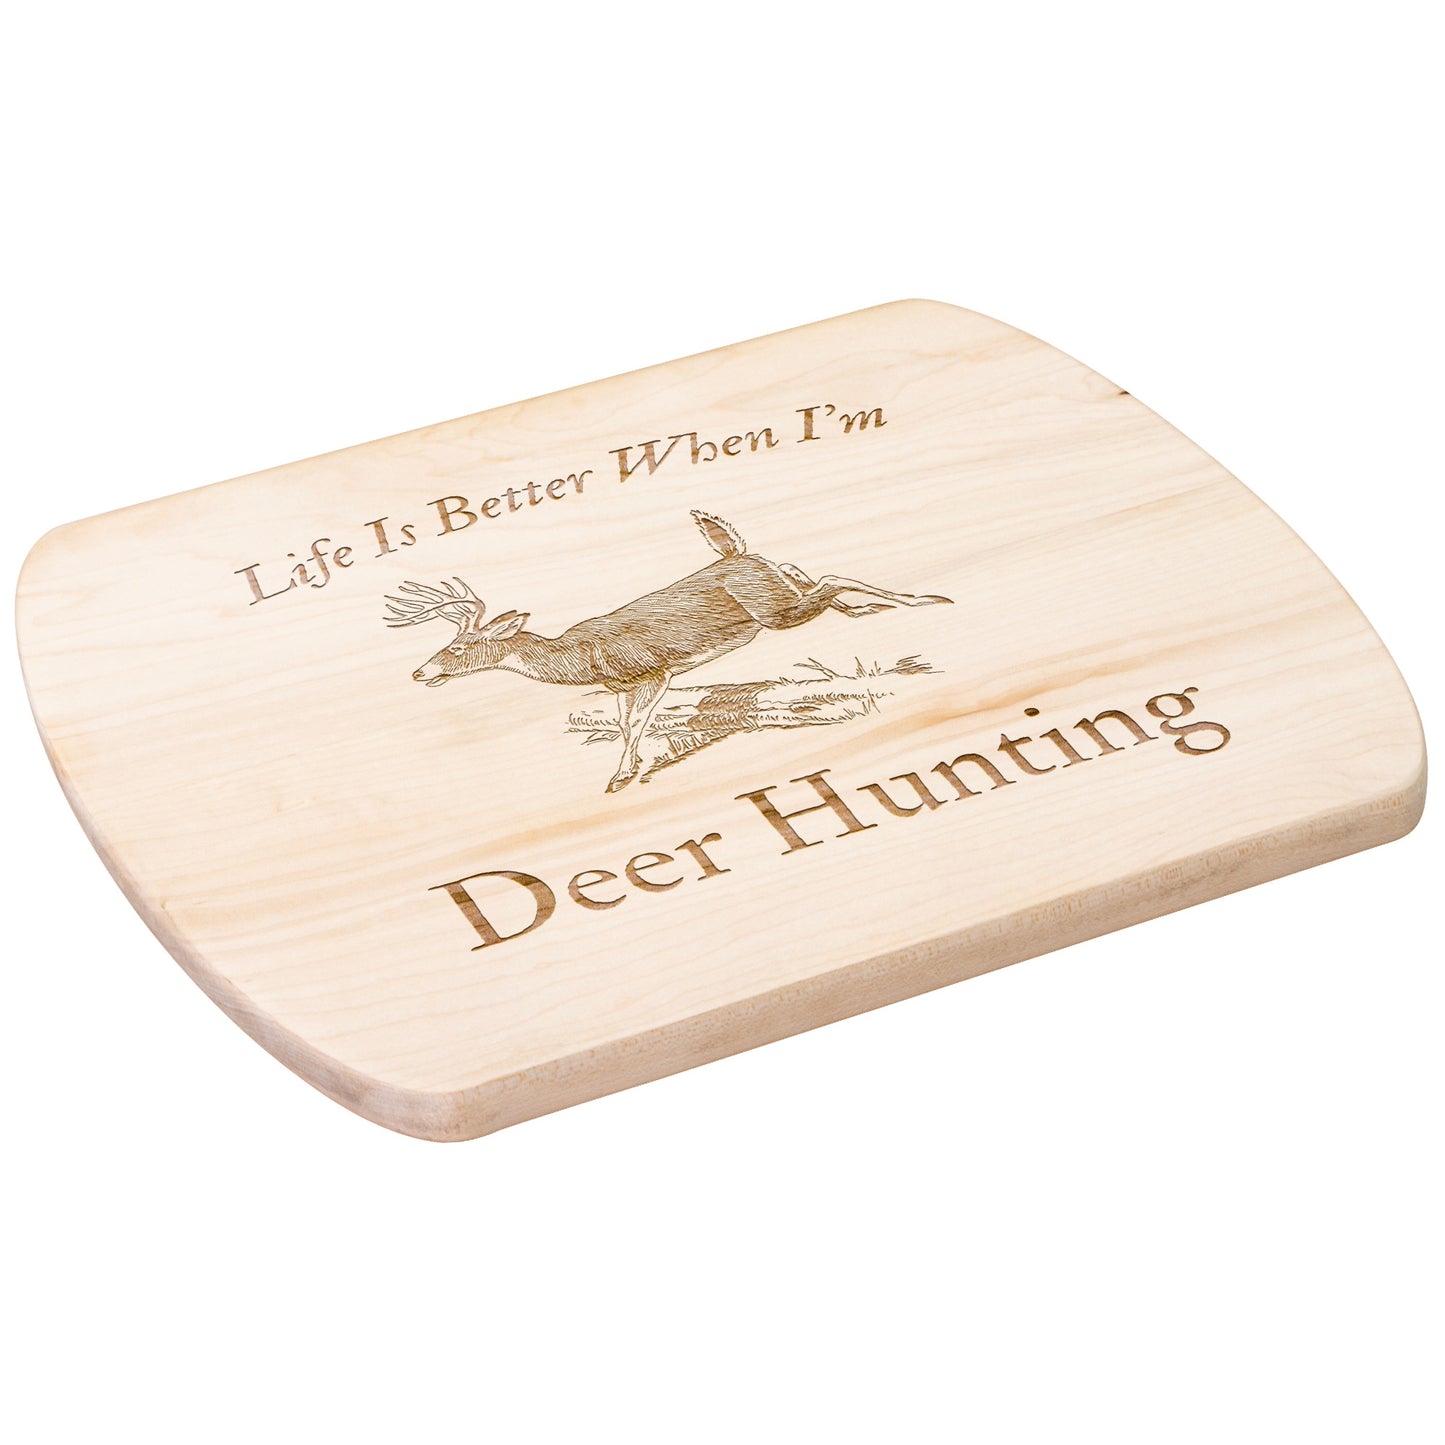 Cooking and prepping board with "Life Is Better When Deer Hunting" design.